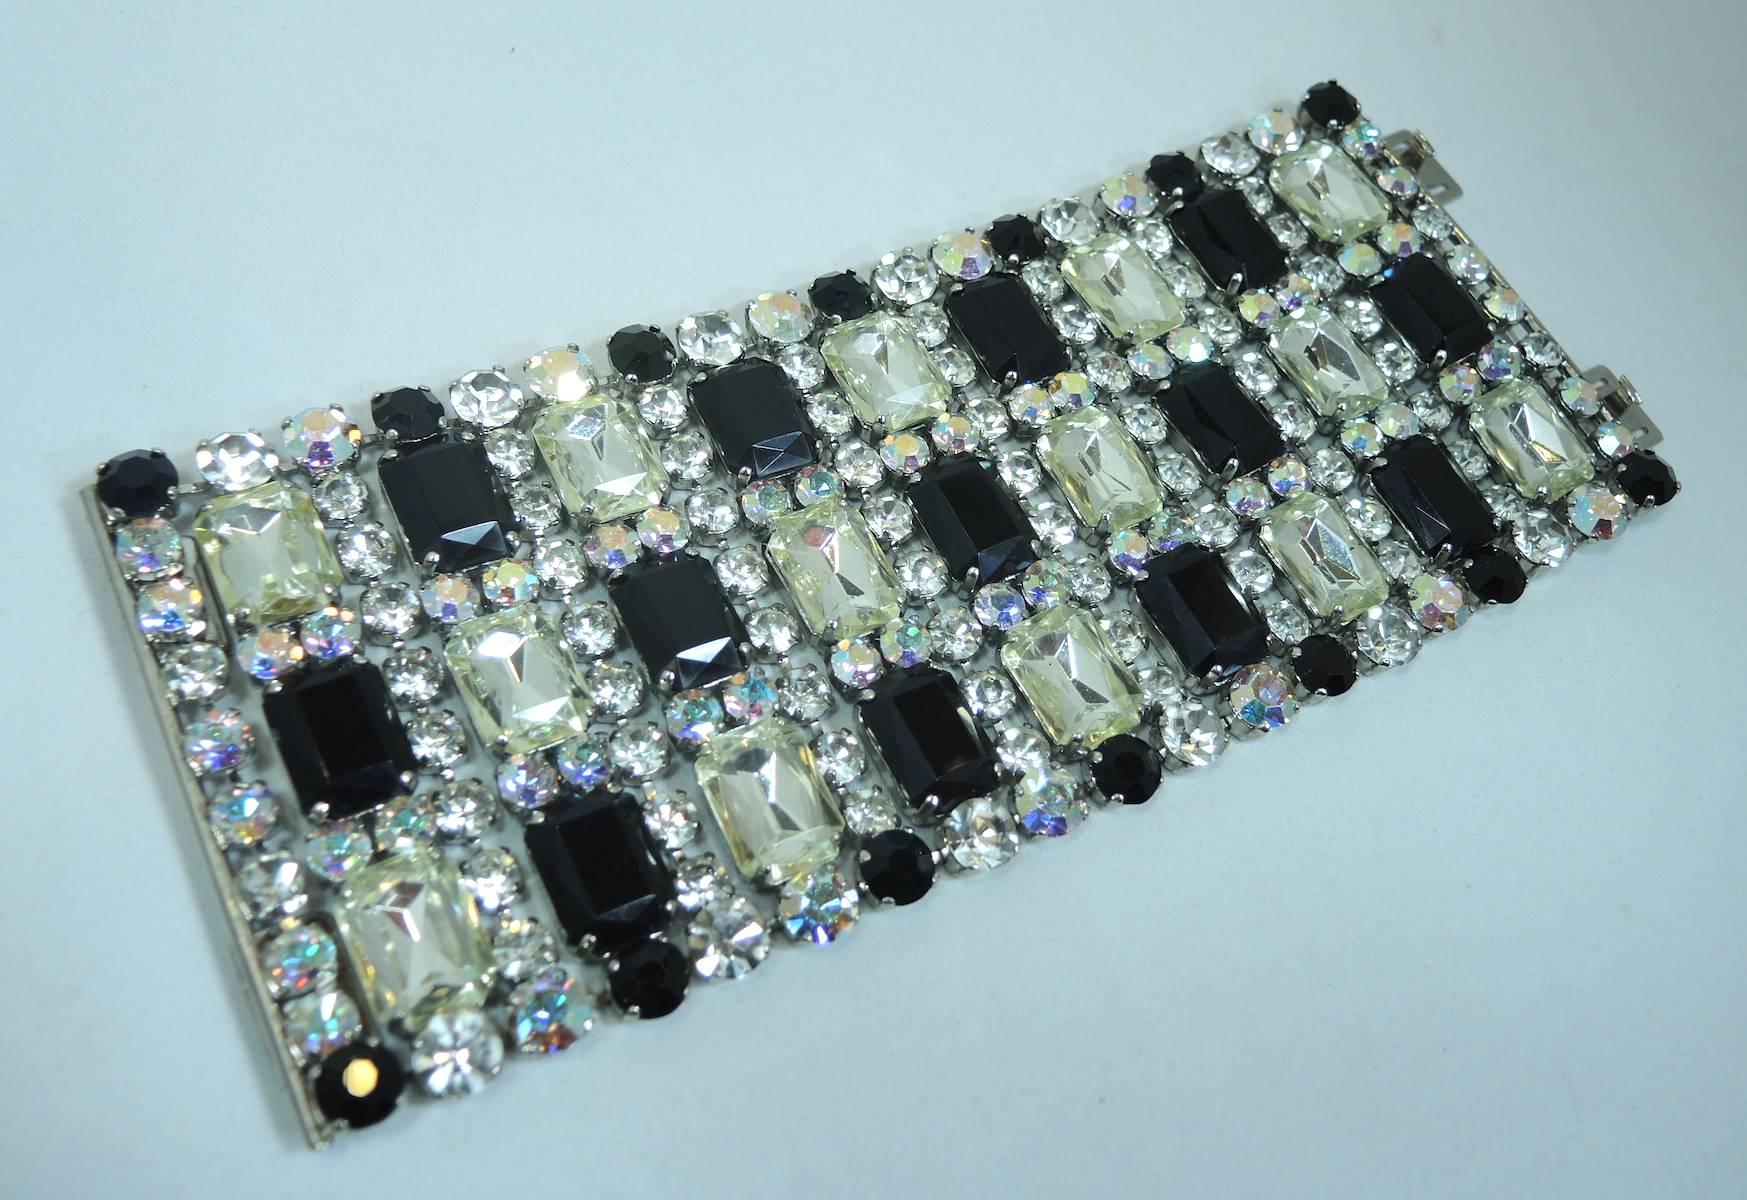 I was very fortunate to come across two of these bracelets and had to have them! They are fabulous and were designed by the famous Gianni De Liguoro of the Italian Bijoux Company. This bracelet has vibrant clear and black rhinestones throughout this